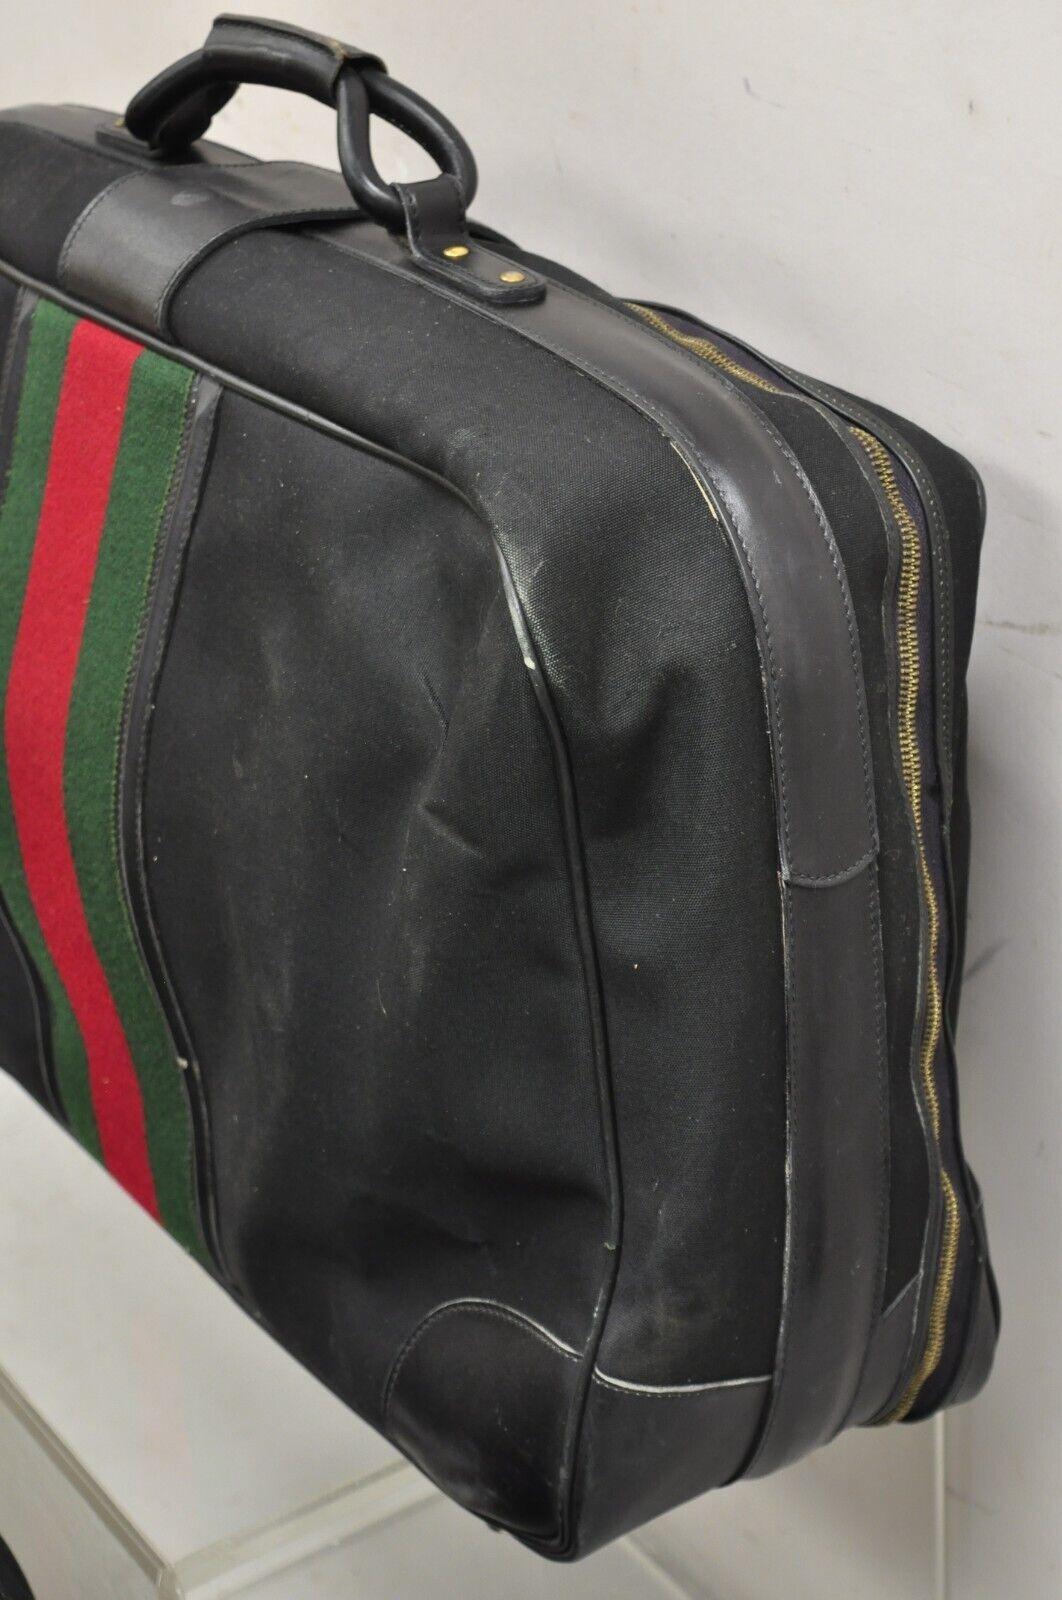 Vintage Gucci Black Canvas & Leather Suitcase Luggage His and Hers Set -2 Pc (B) For Sale 4